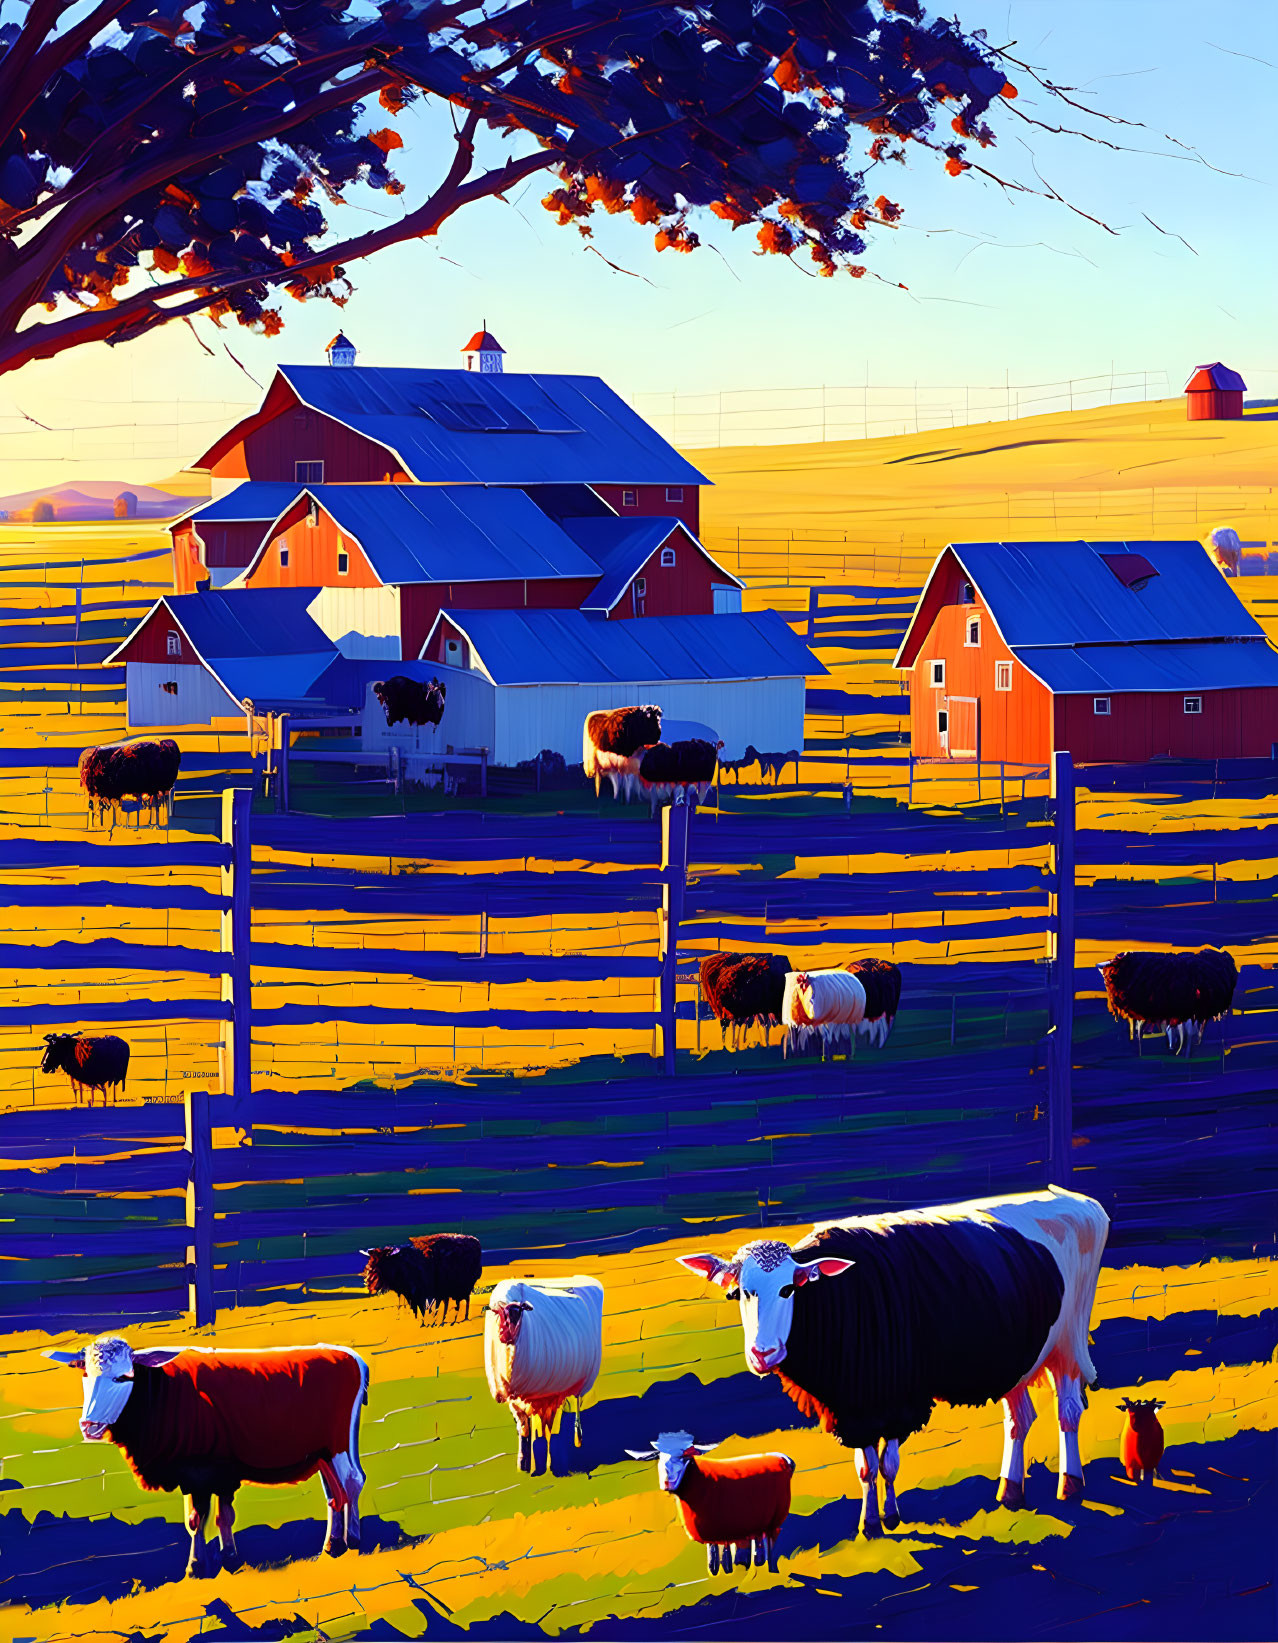 Colorful pastoral farm scene with sheep, red barns, and golden field under blue sky